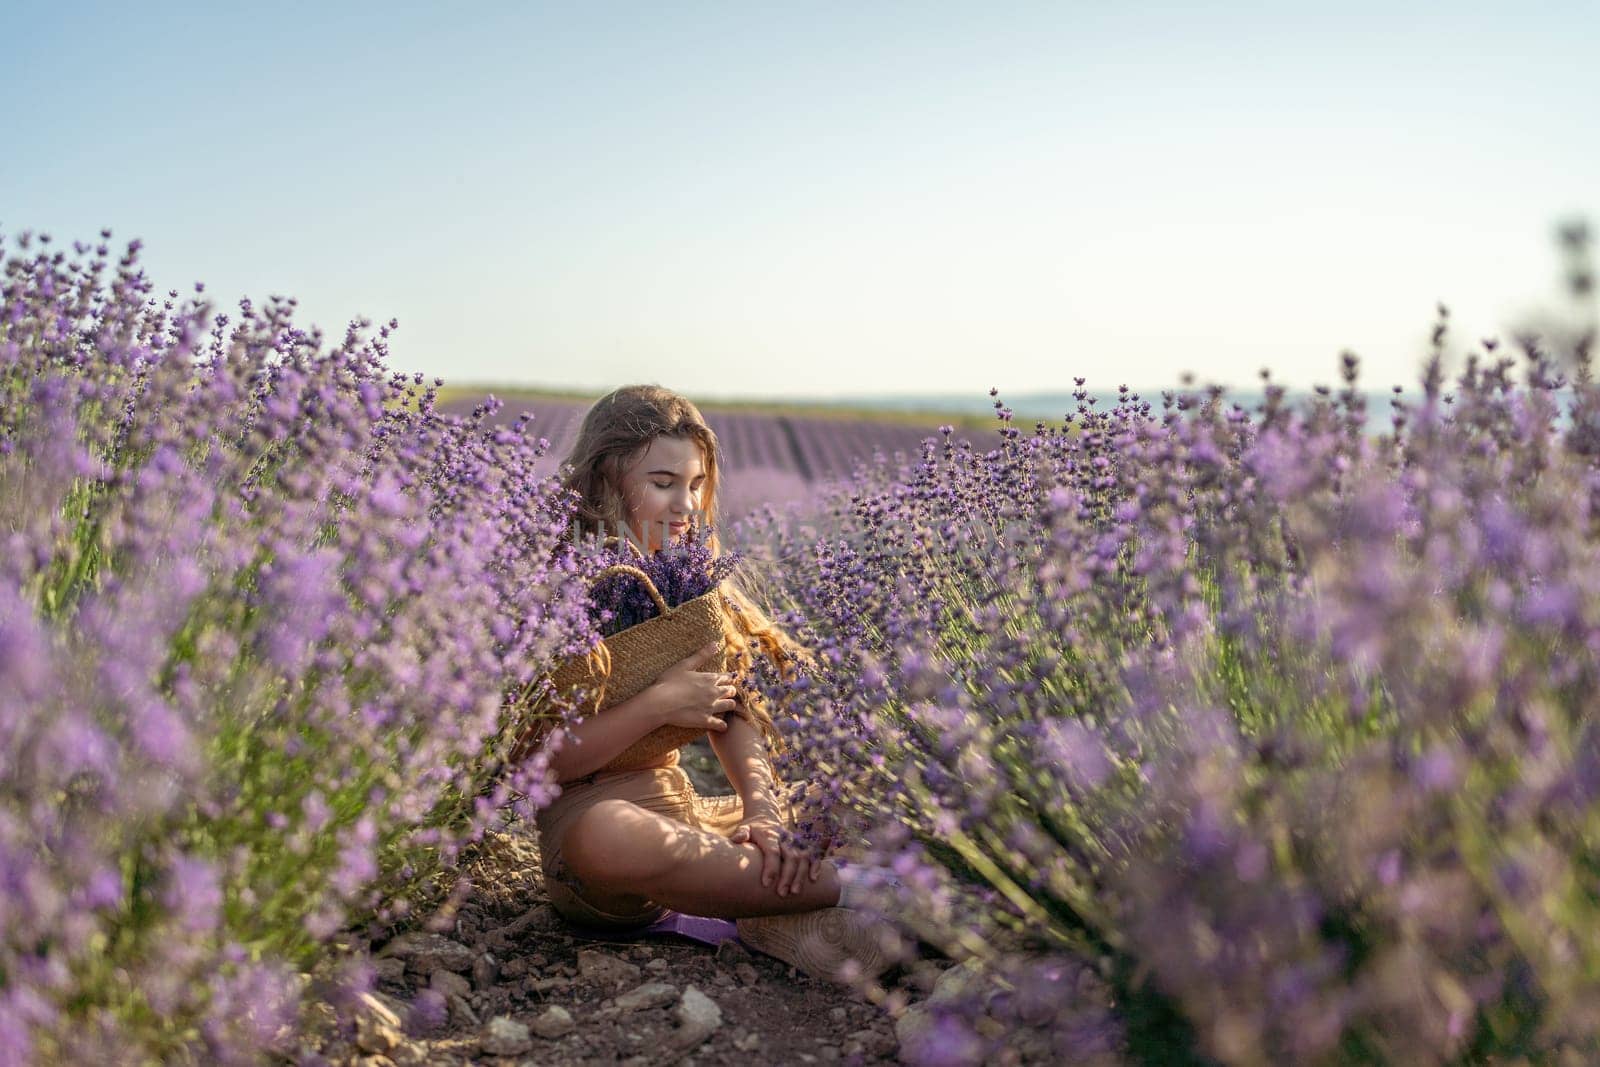 Girl is sitting in a field of purple flowers. She is holding a basket of flowers and smiling. Scene is peaceful and serene, as the girl is surrounded by the beauty of nature. by Matiunina